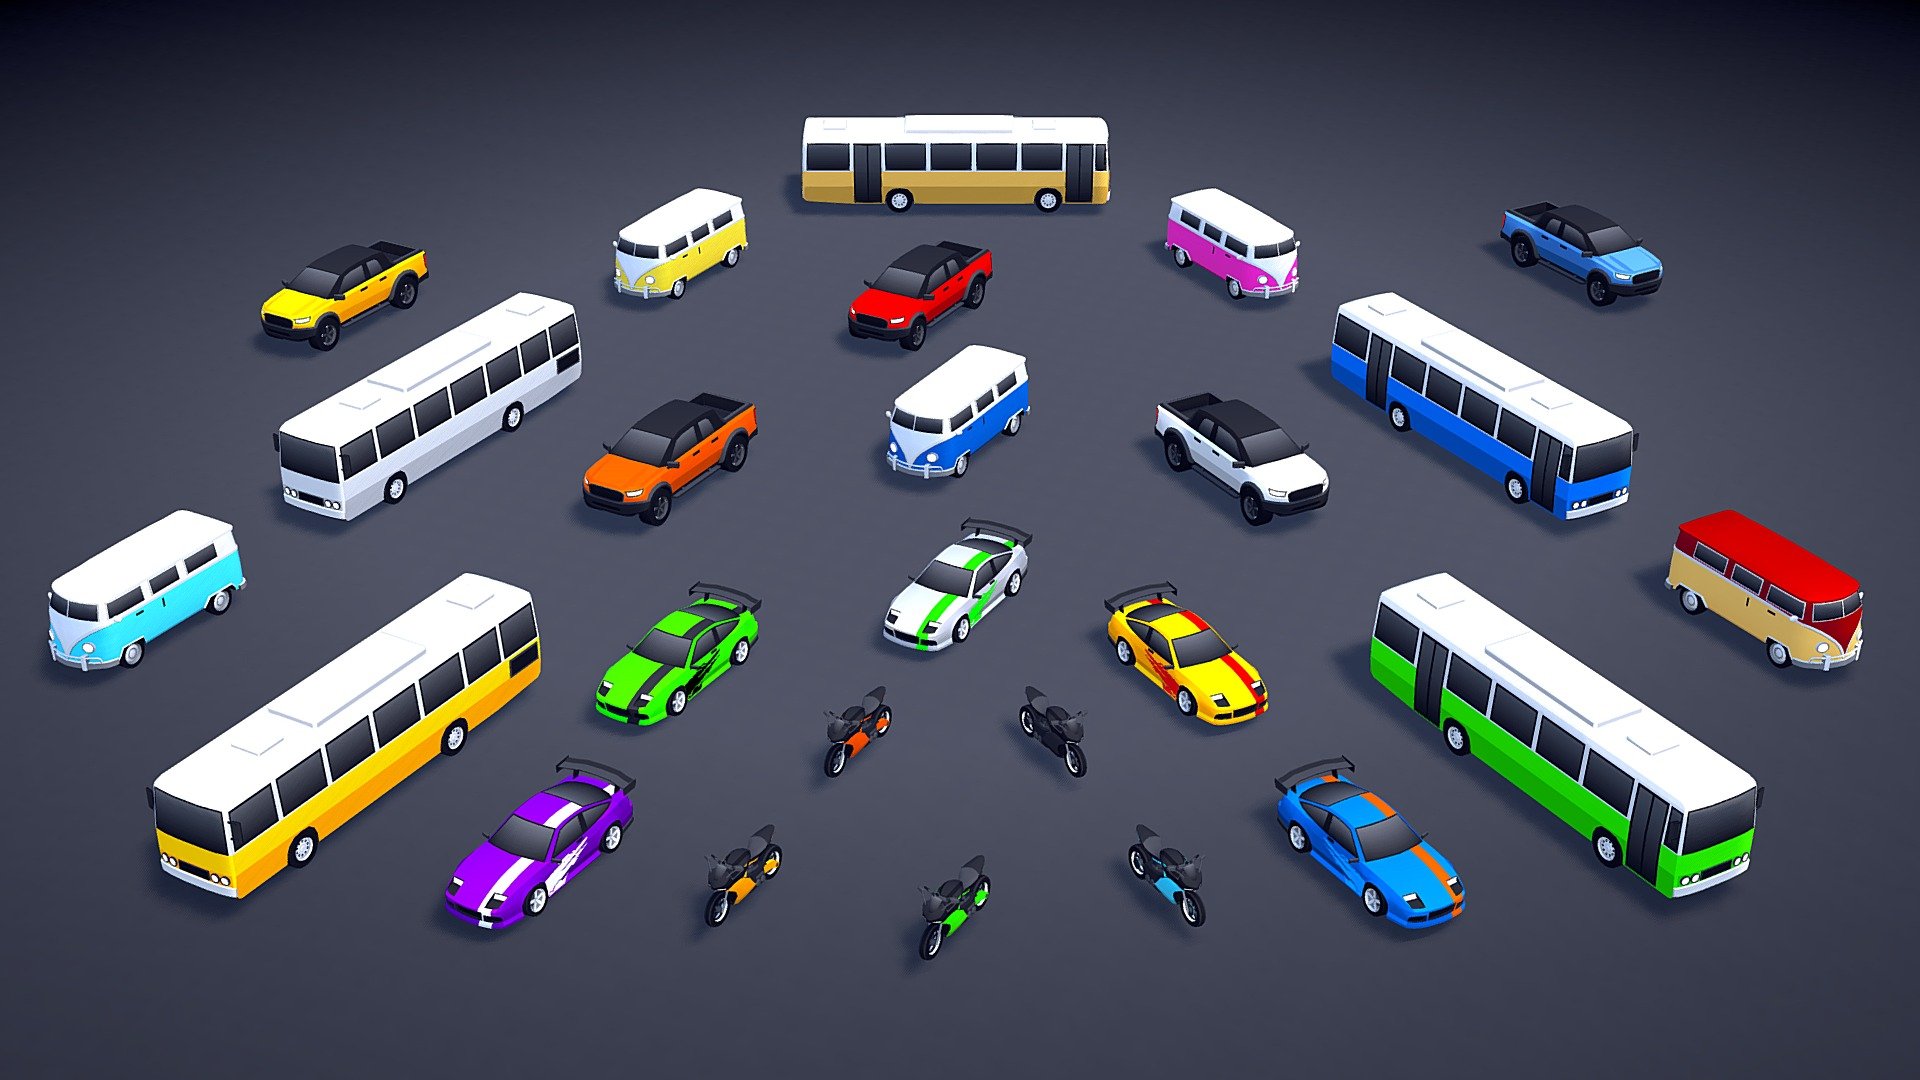 All these vehicles will be added to ARCADE: Ultimate Vehicles Pack in November 3rd with no additional cost. Available in Unity3D (in the Unity Asset Store) and Sketchfab (FBX + UNITY Files included).

The update includes cars, trucks, motorbikes and more!. I hope you like it

Best regards, Mena 3d model